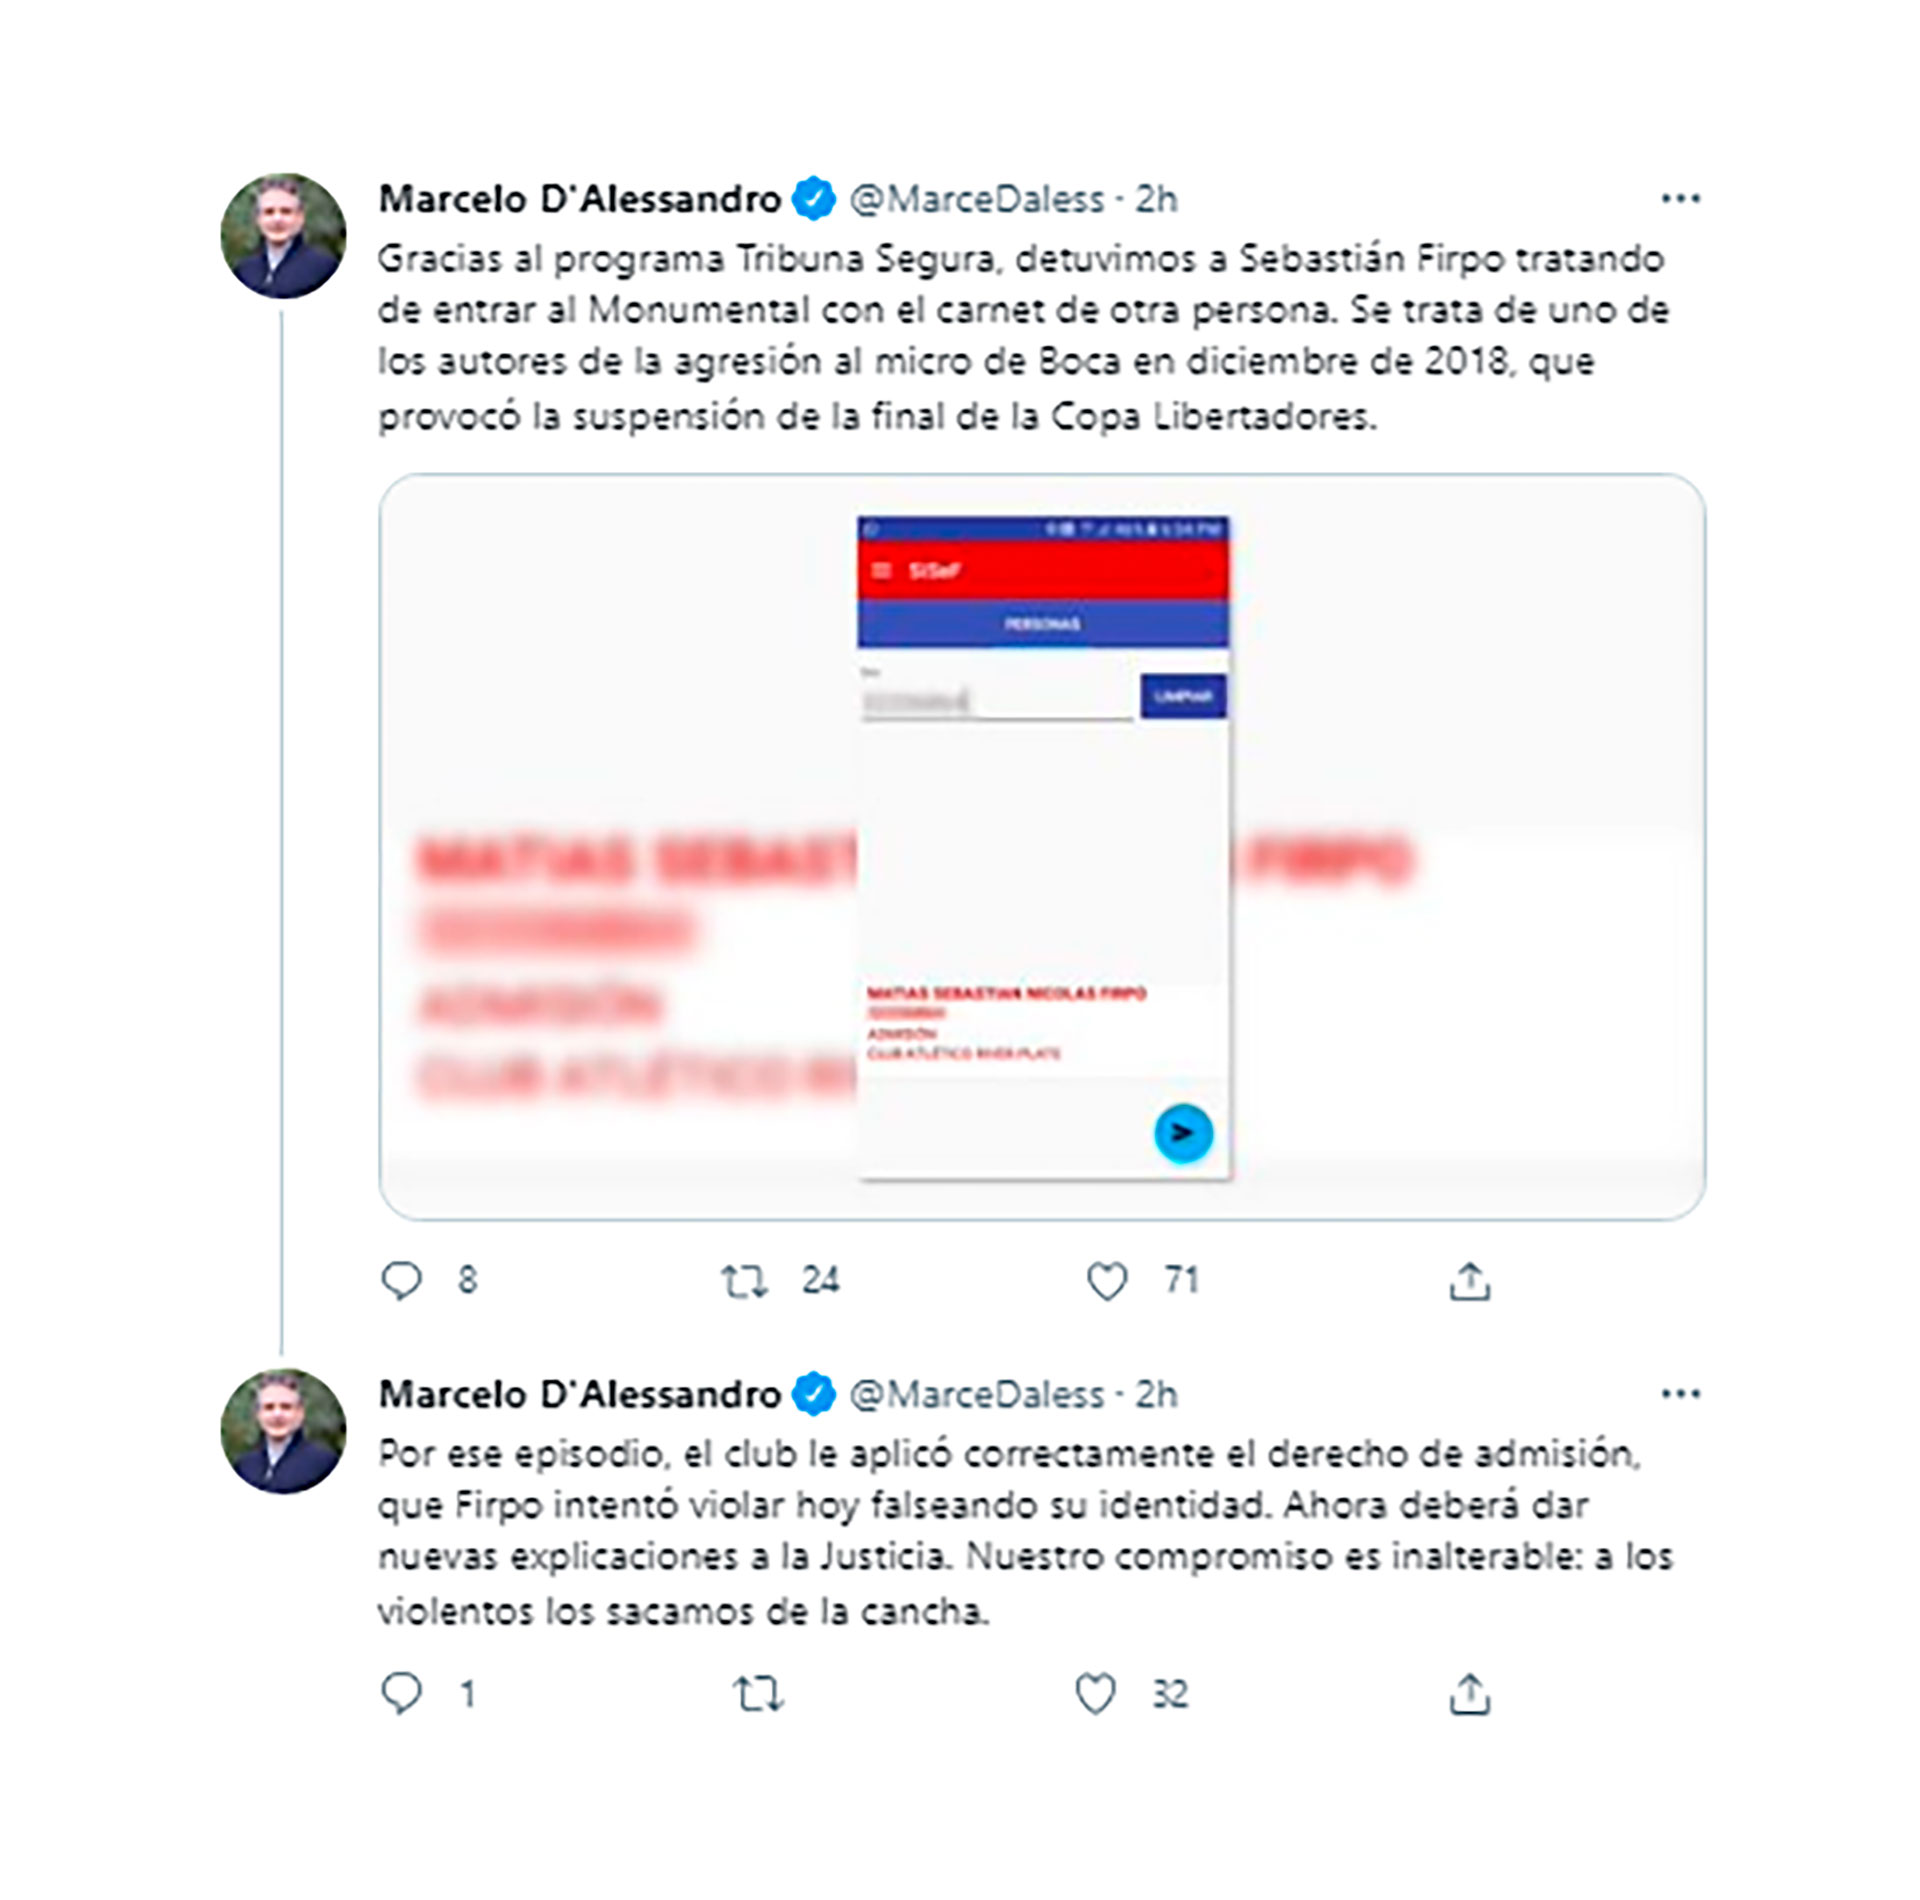 Tweets from the city's Minister of Security and Justice Marcelo D'Alessandro after the arrest